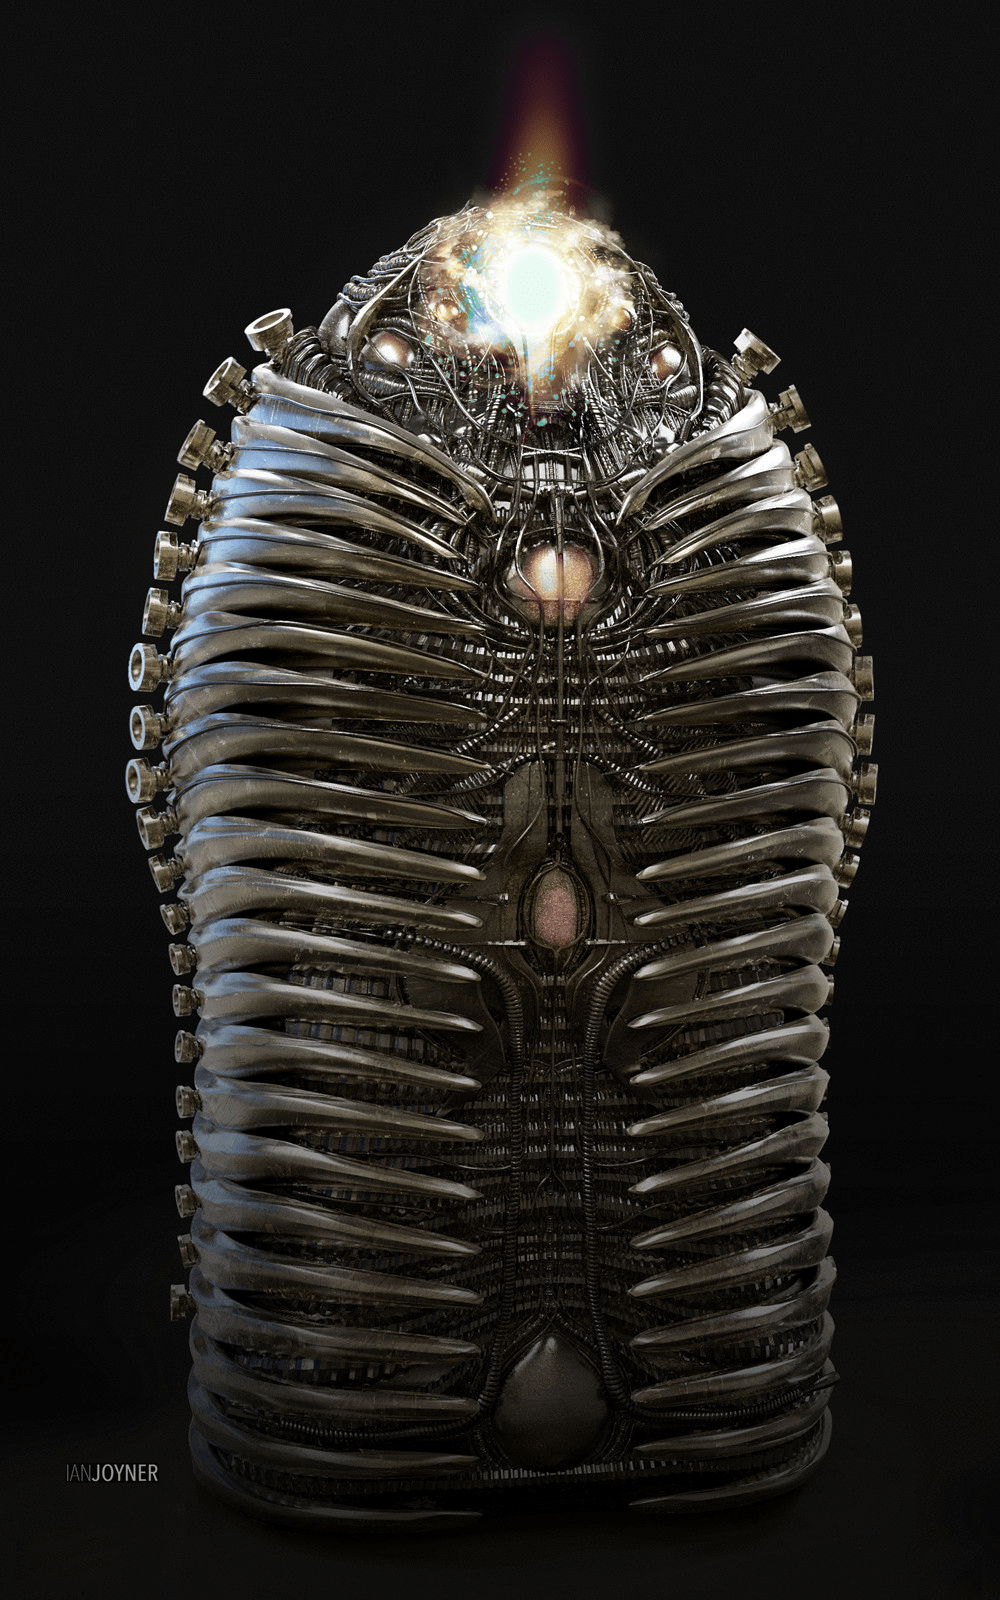 Adam Warlock’s Cocoon From Guardians Of The Galaxy Vol. 2 Is Even Creepier Up Close